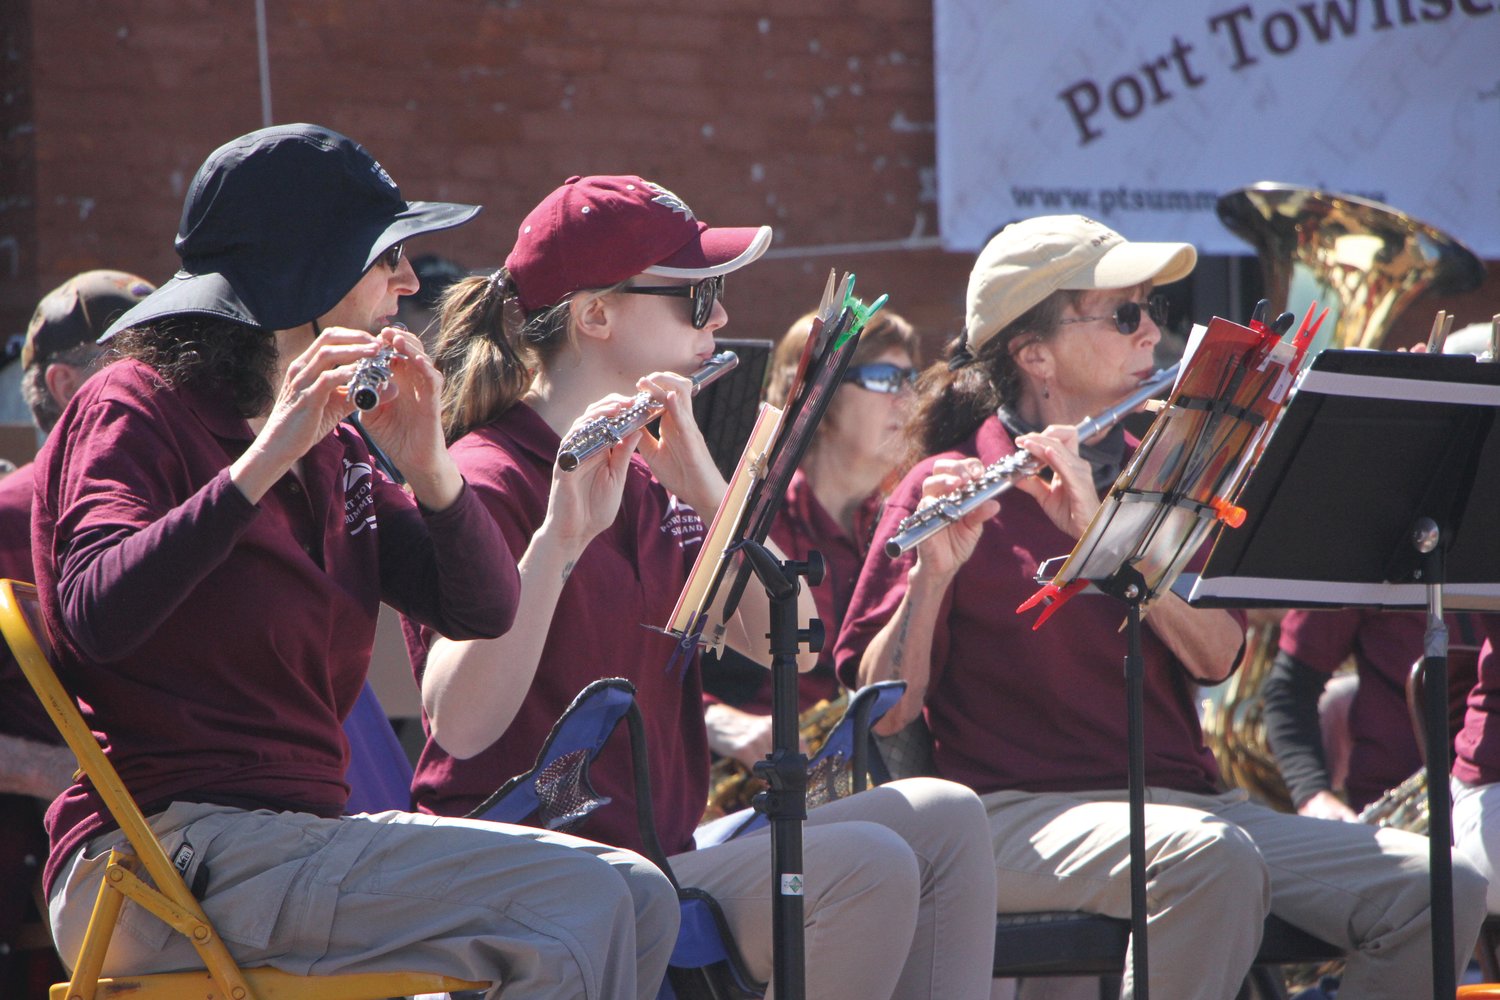 For the first time in over 20 months, the Port Townsend Summer Band perform a live and in-person concert at Pope Marine Park plaza.